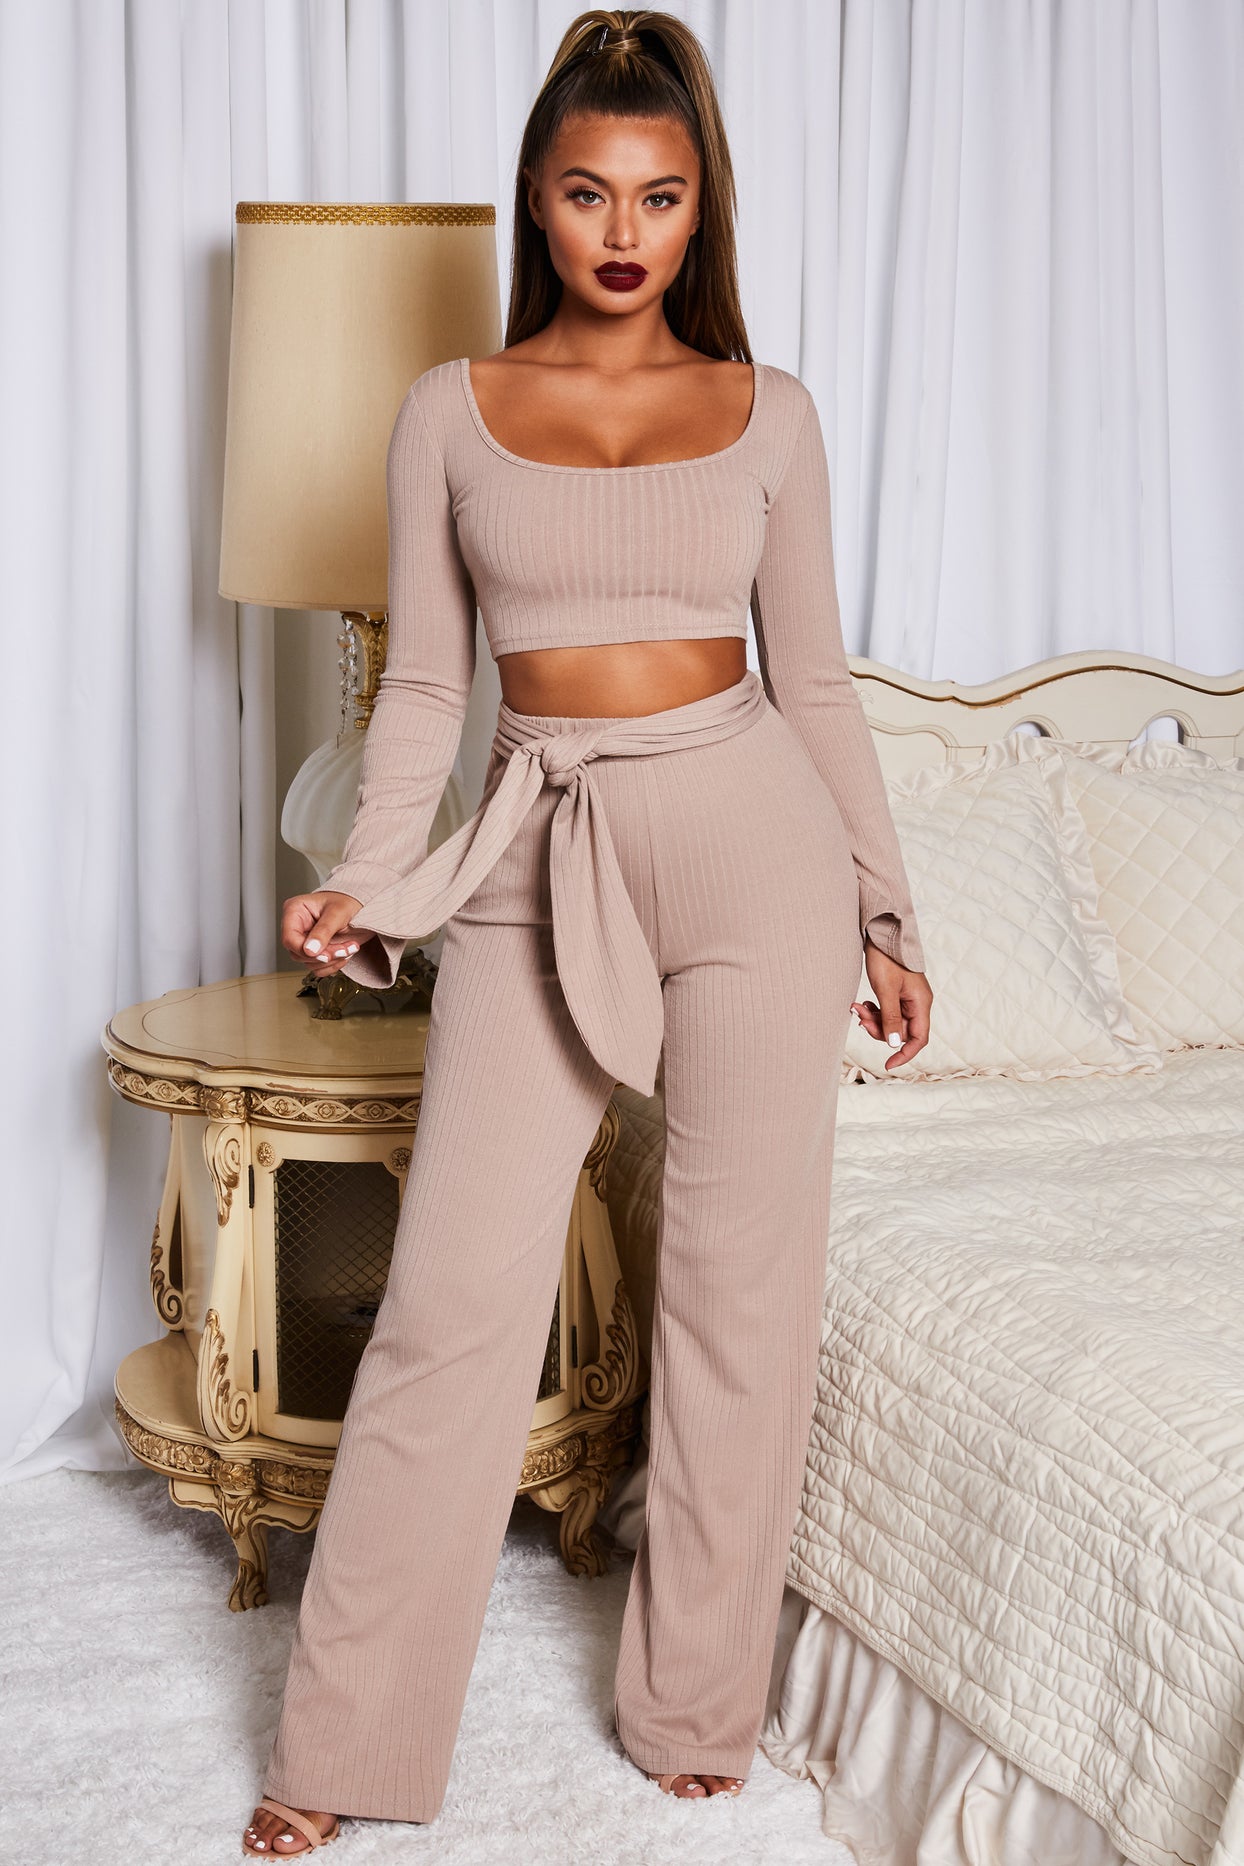 Hands Are Tied Ribbed Long Sleeve Crop Top in Stone